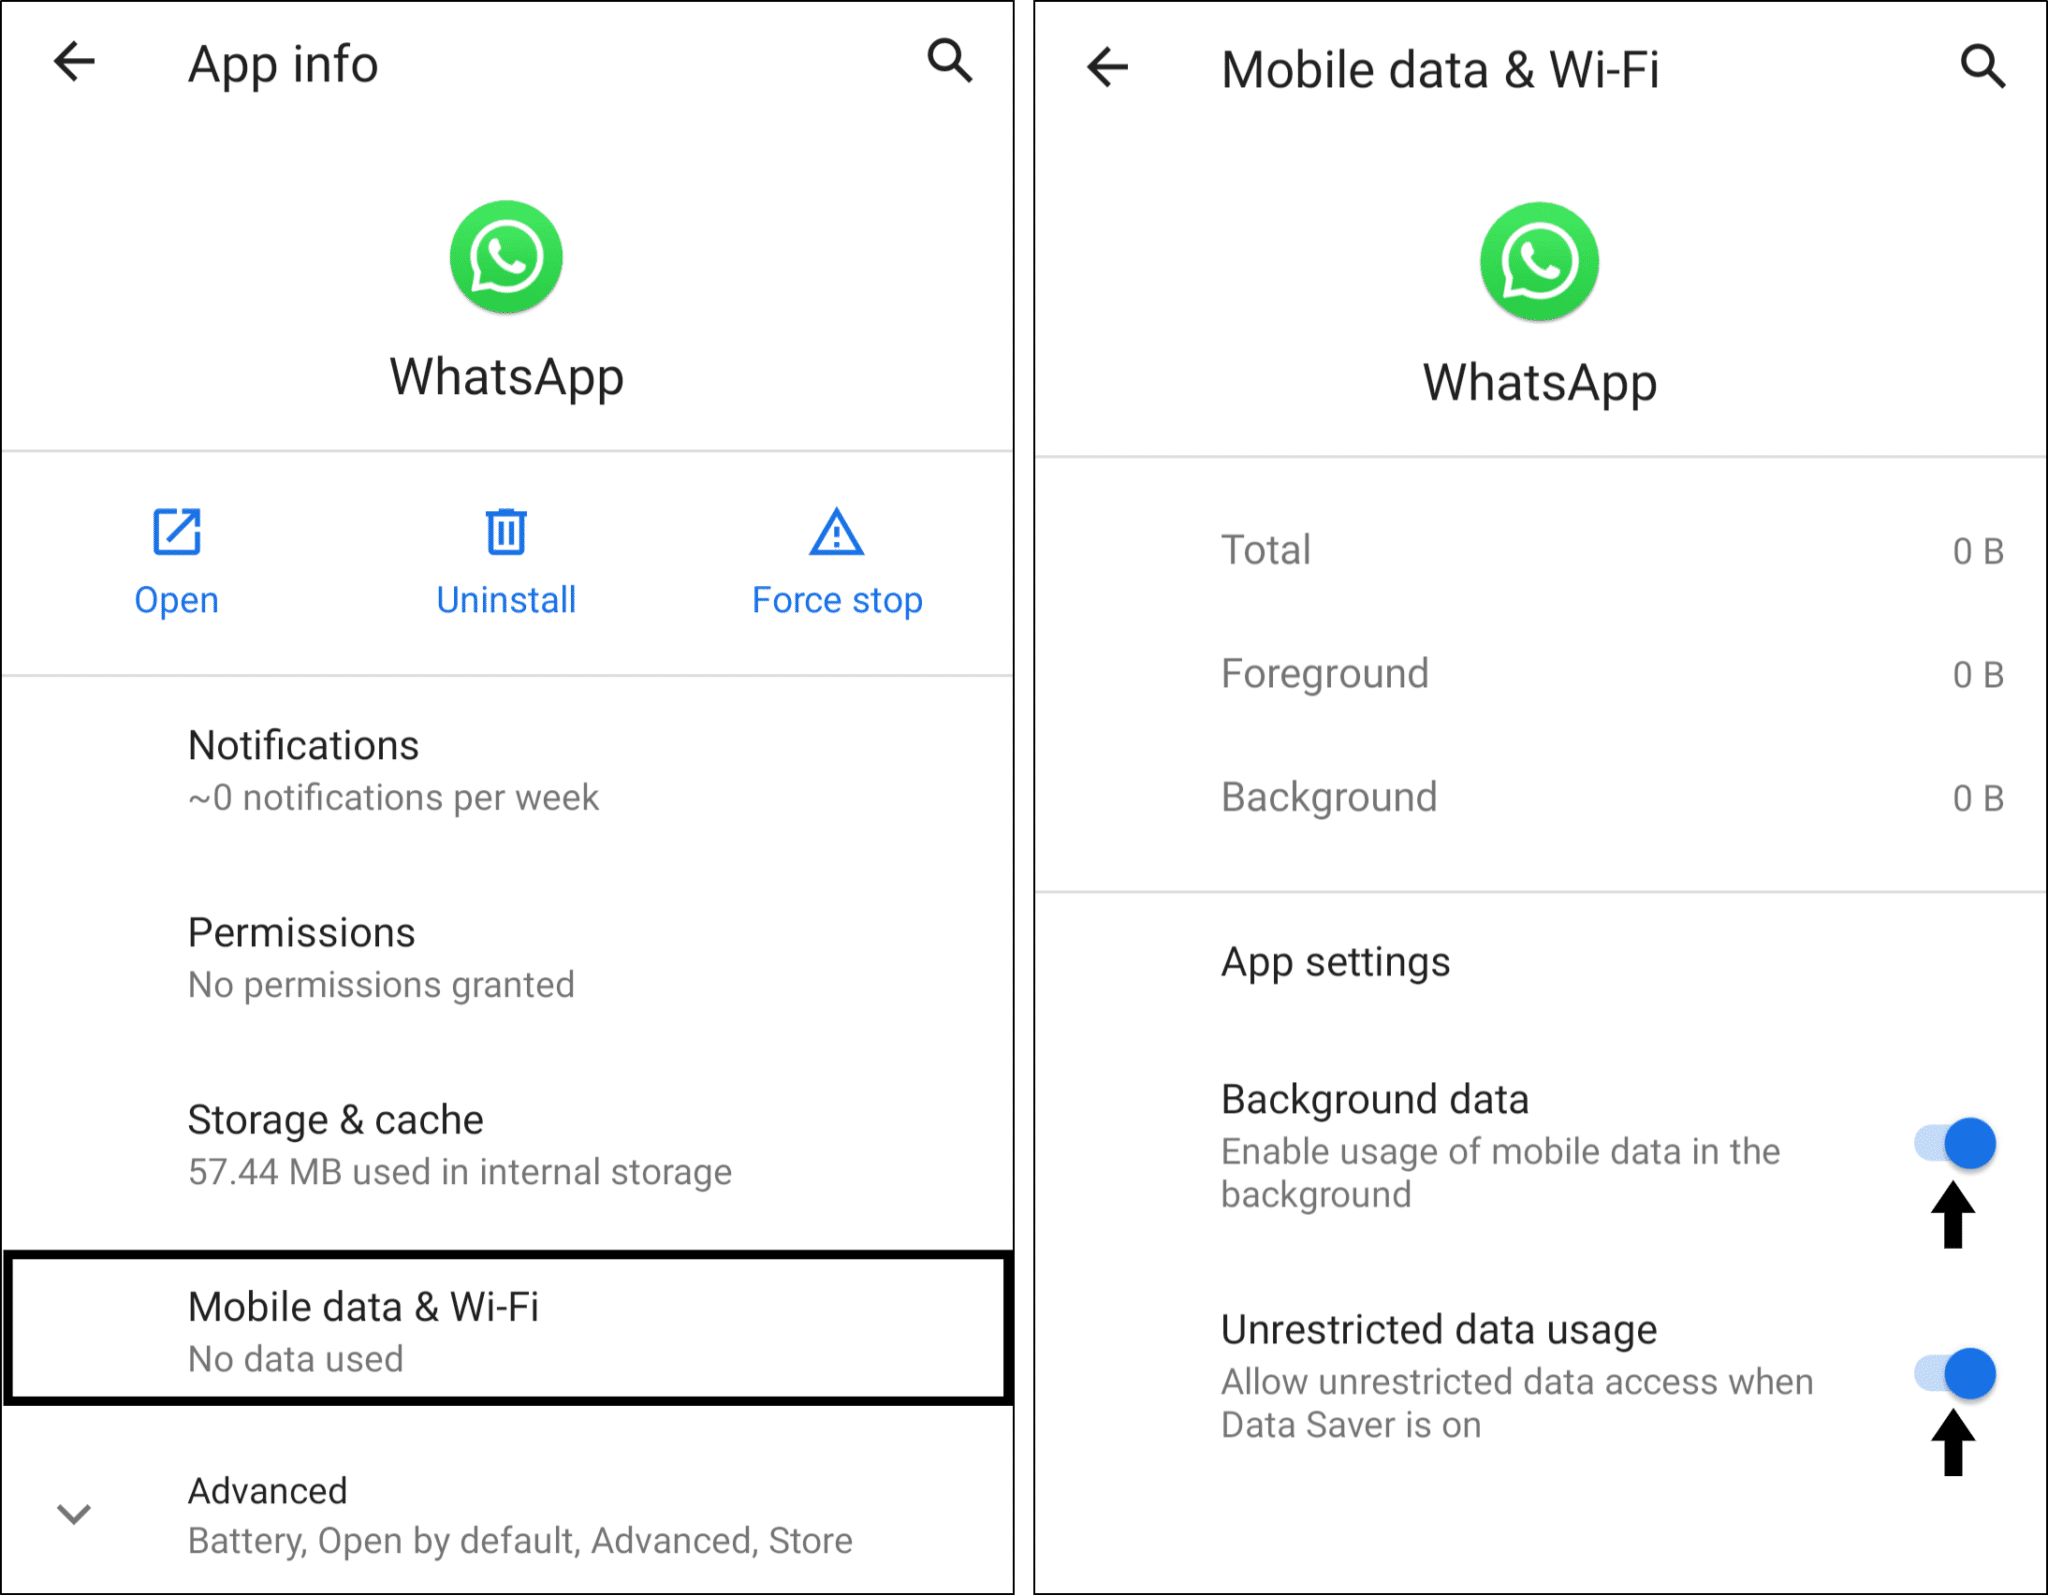 Enable background app refresh to fix Whatsapp calls not ringing on Android